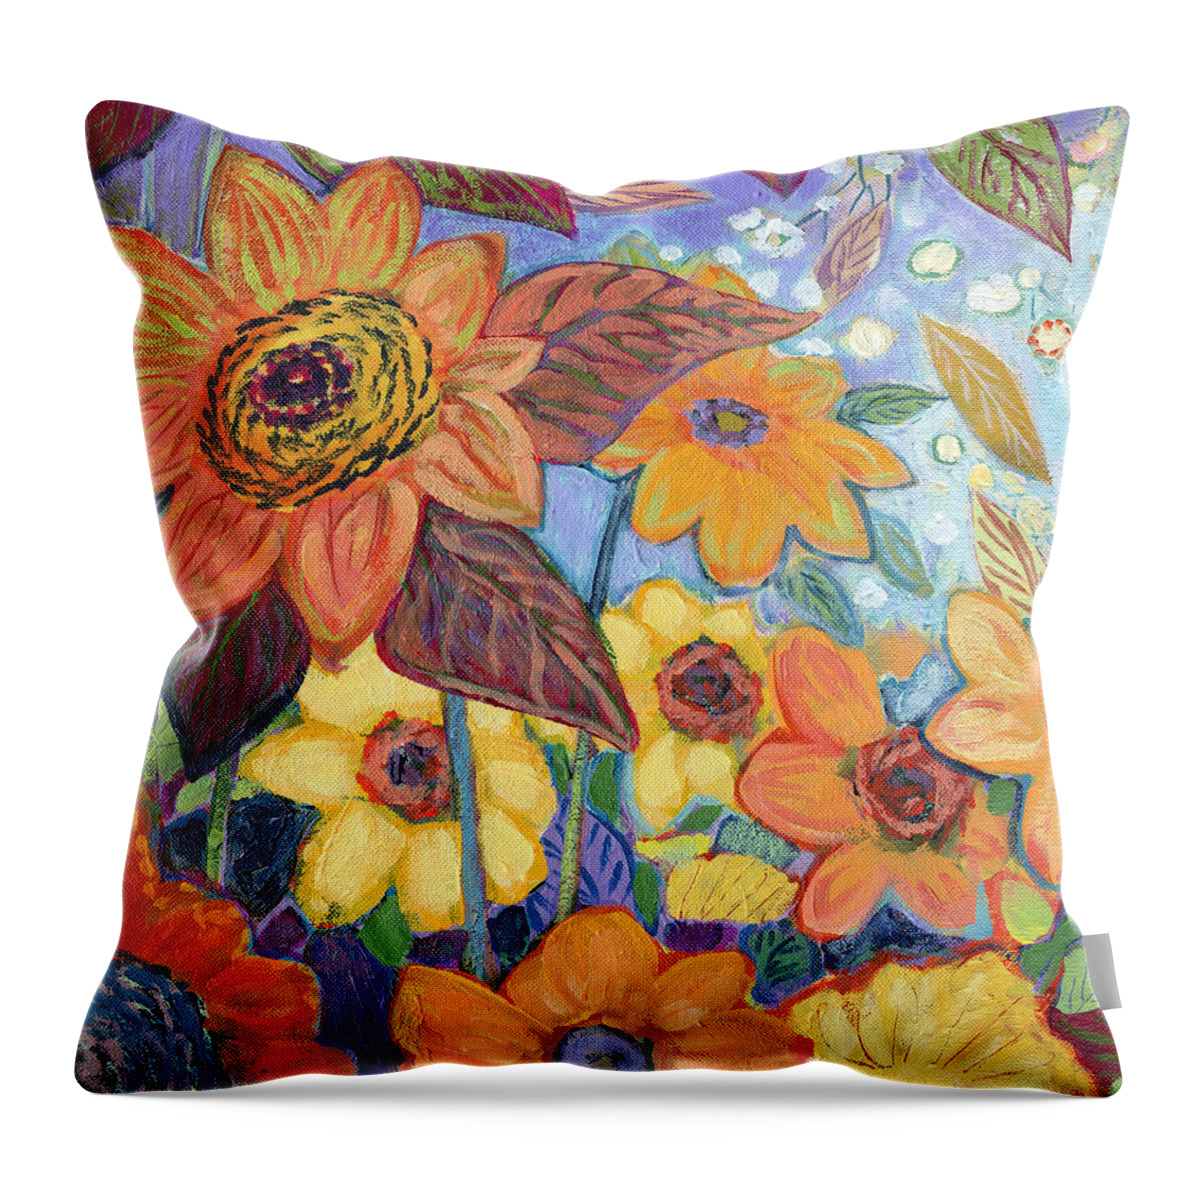 Sunflower Throw Pillow featuring the painting Sunflower Tropics Part 1 by Jennifer Lommers